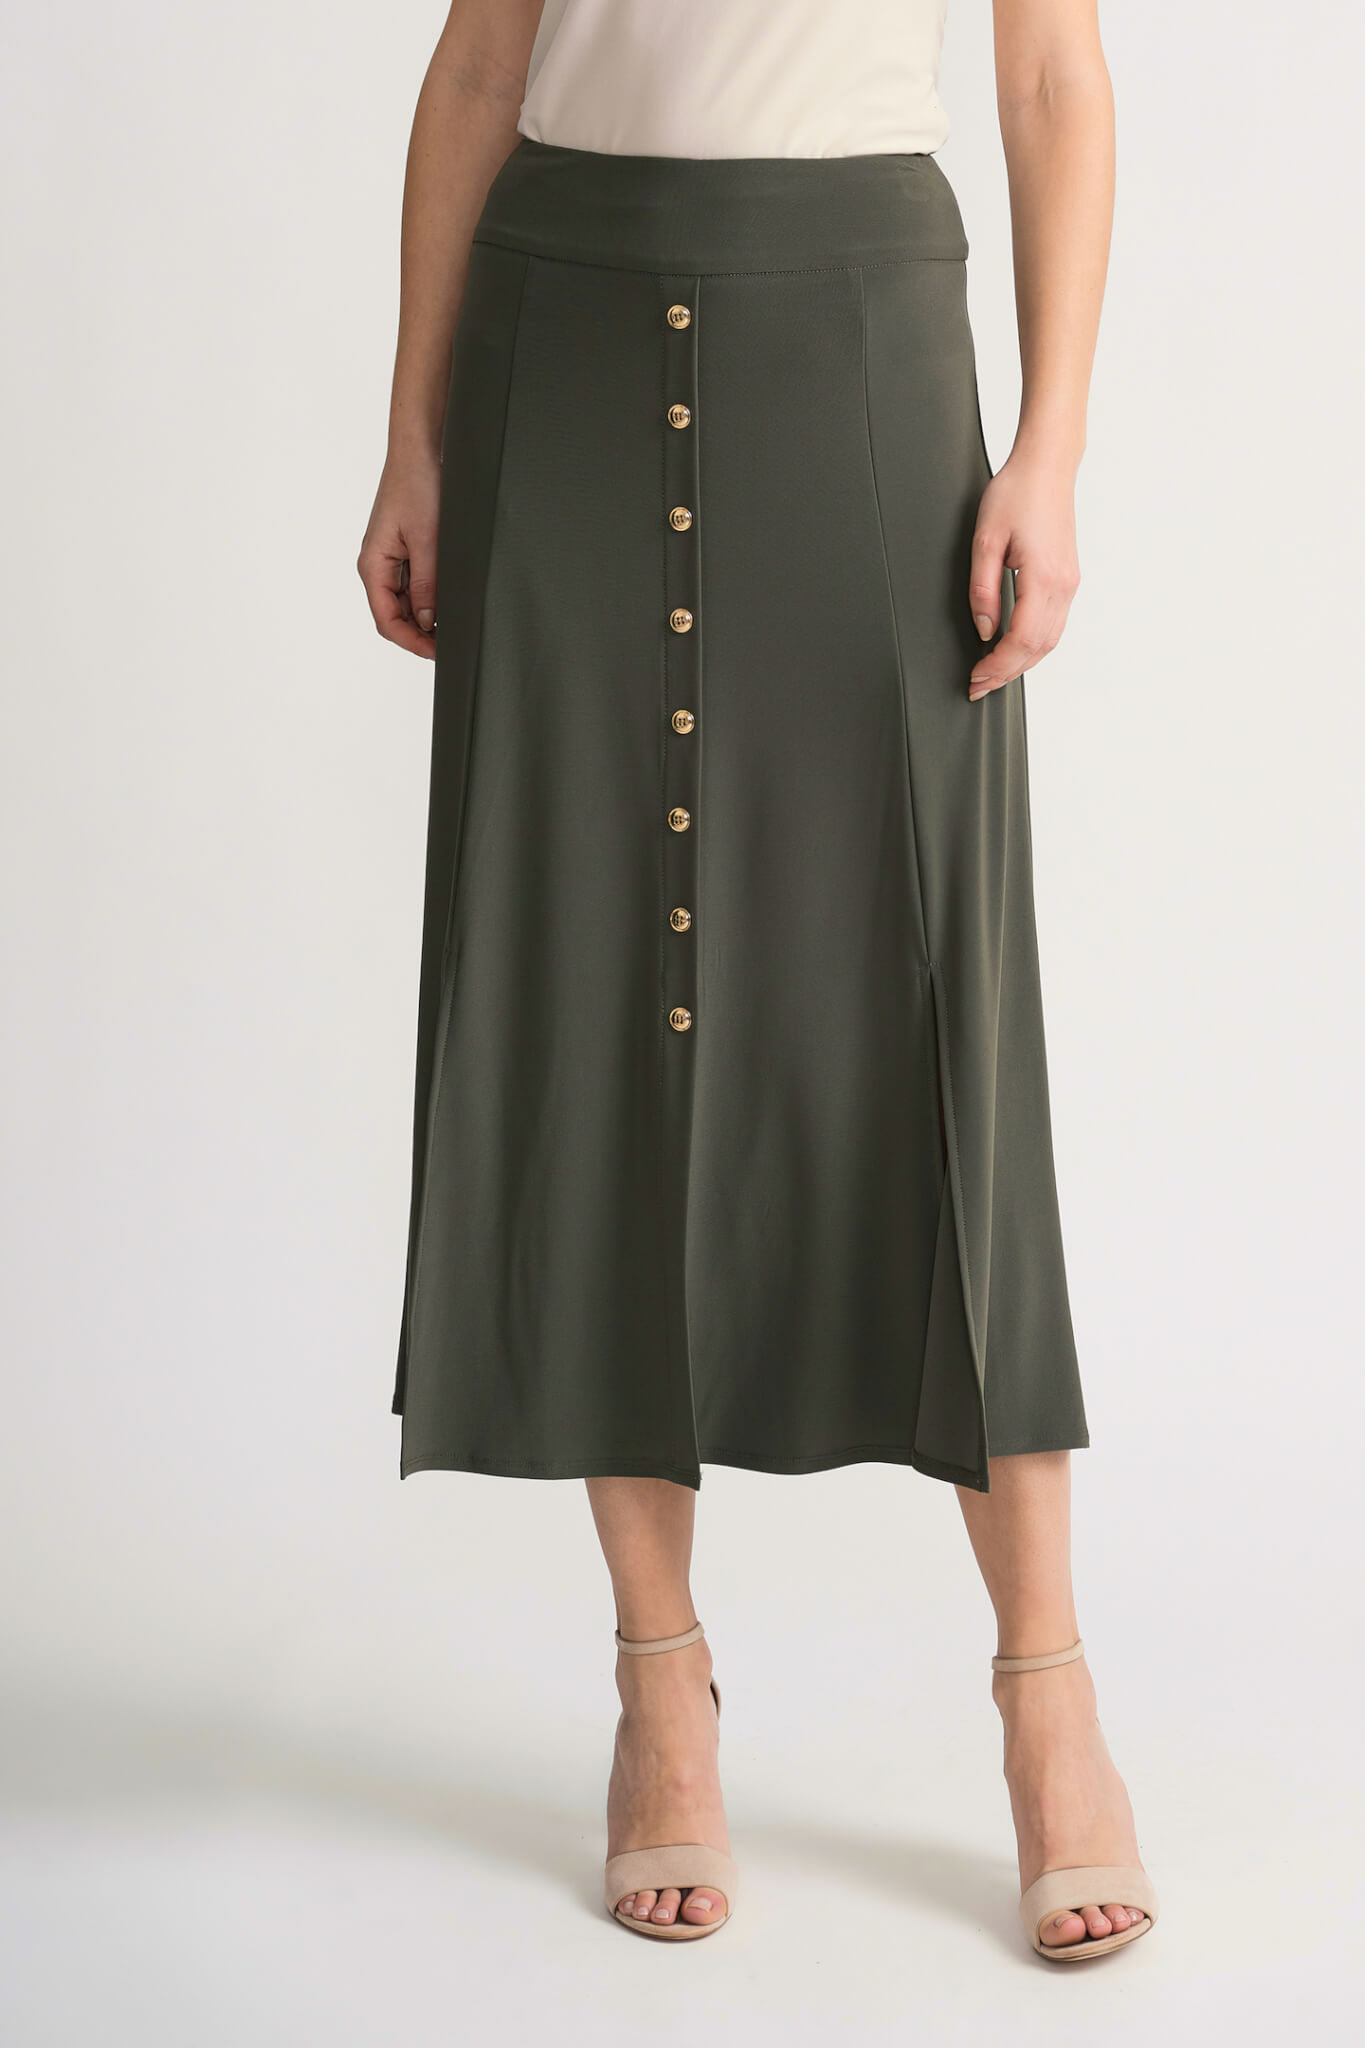 Avocado Swing Skirt with Gold Buttons-Size 4 only | Everard's Clothing